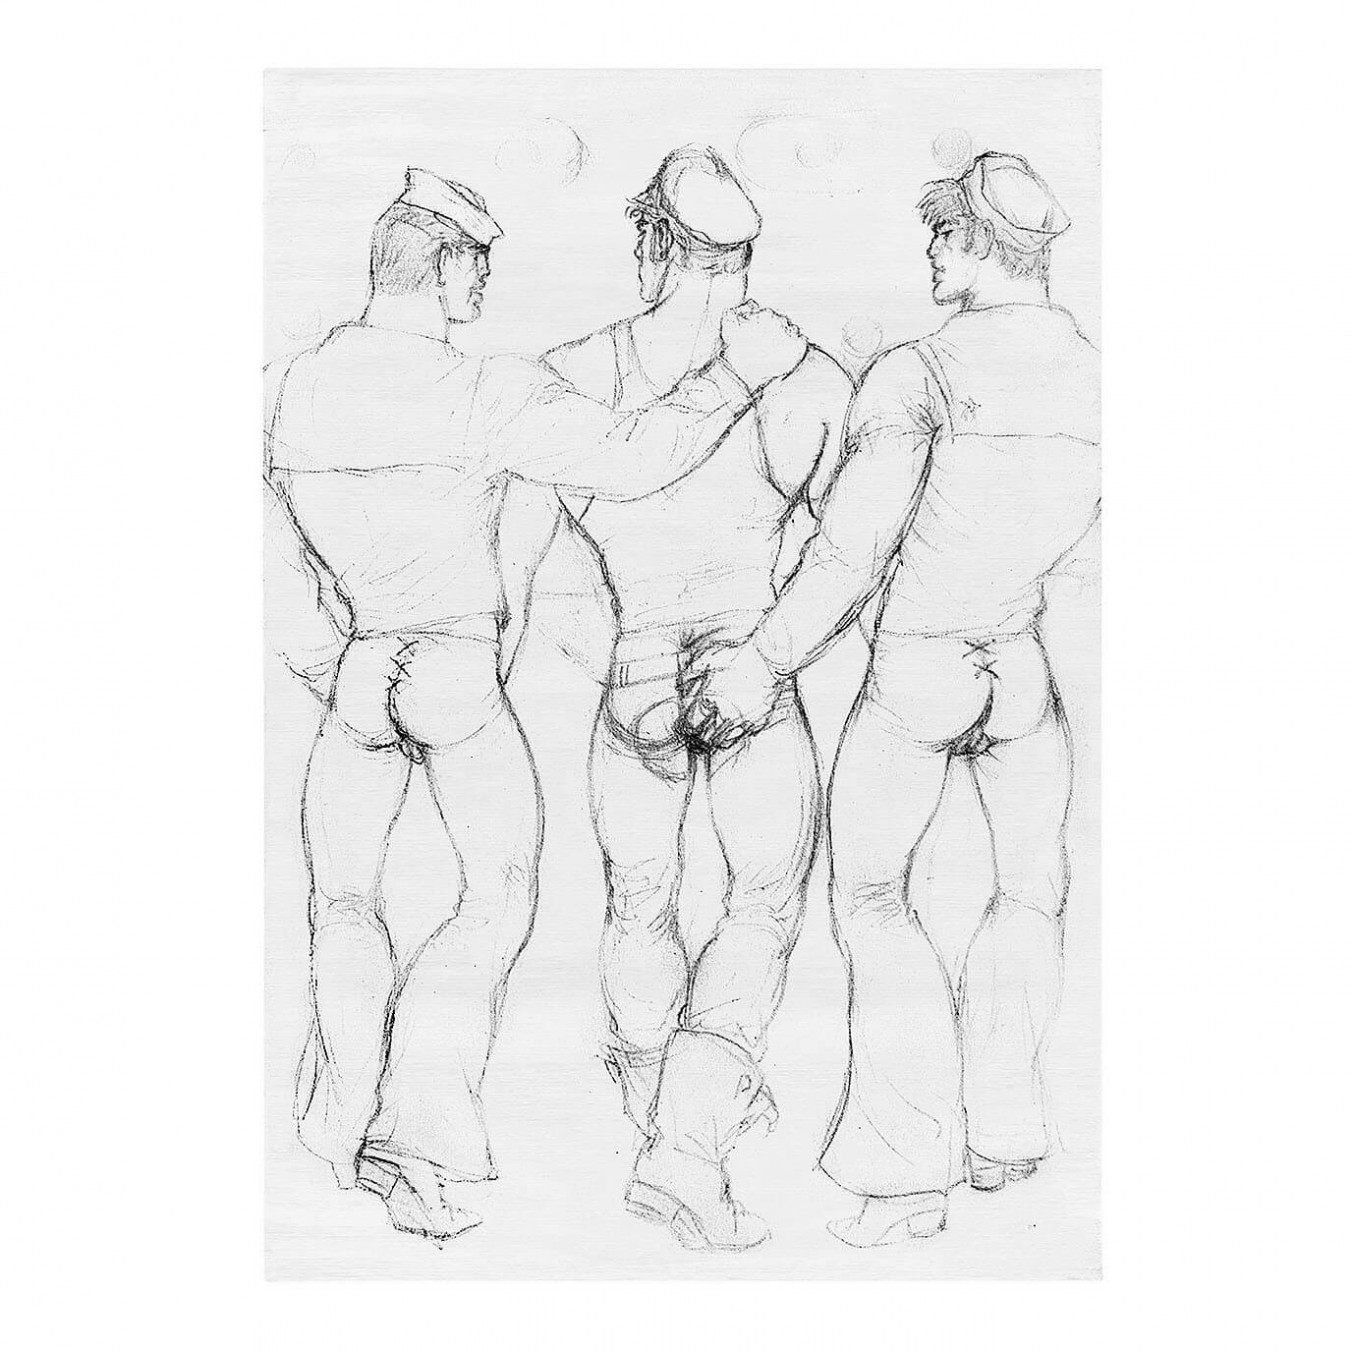 TOM OF FINLAND - Untitled, 1973